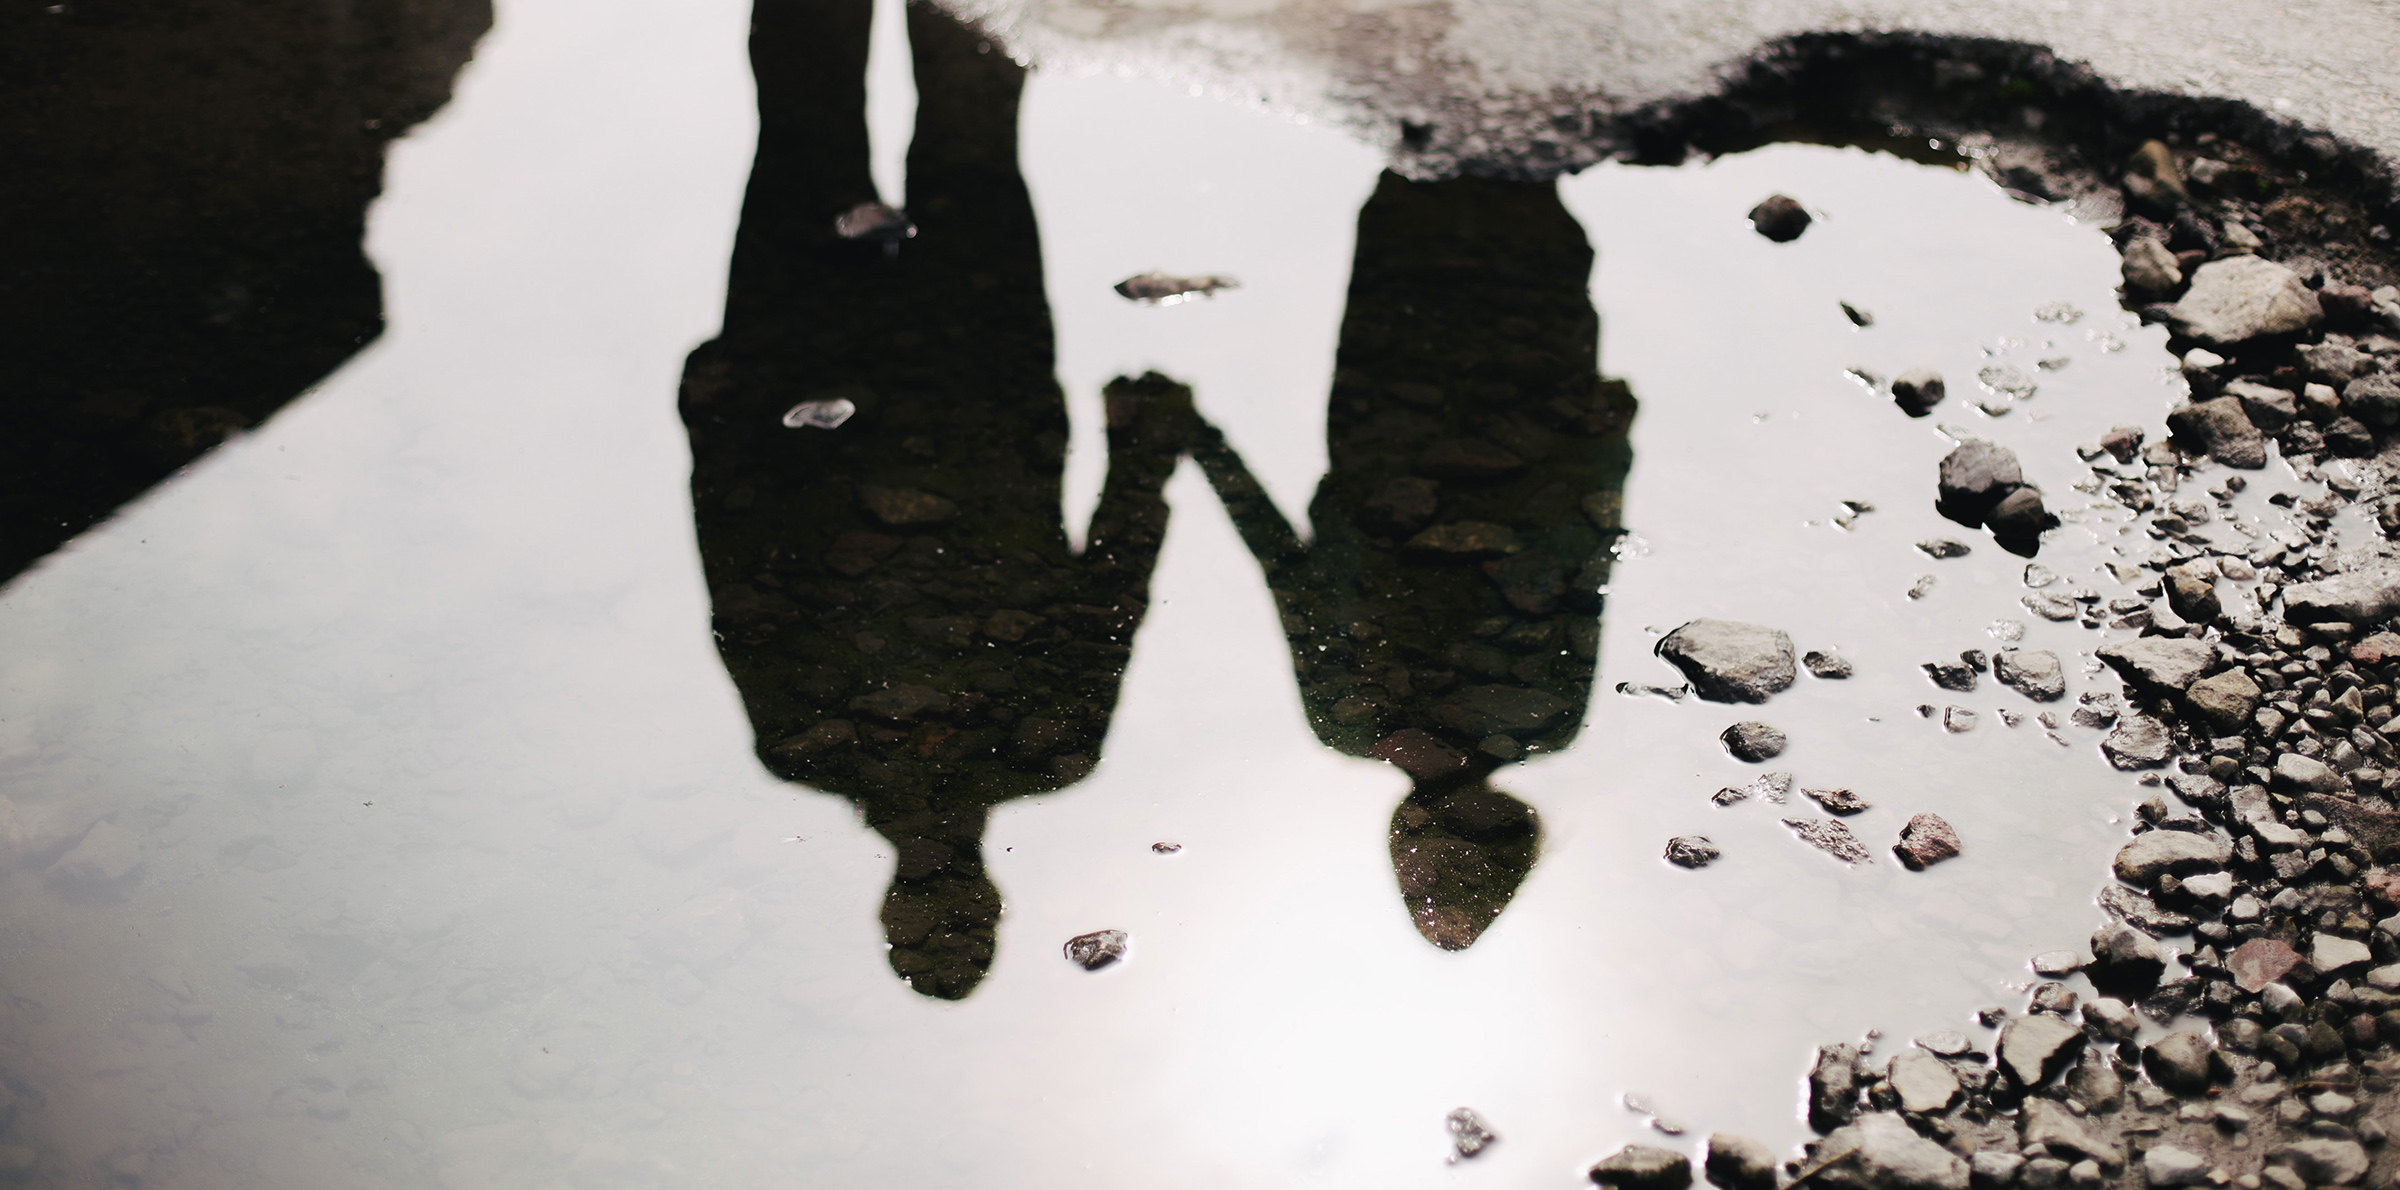 puddle reflection of introspective couple holding hands